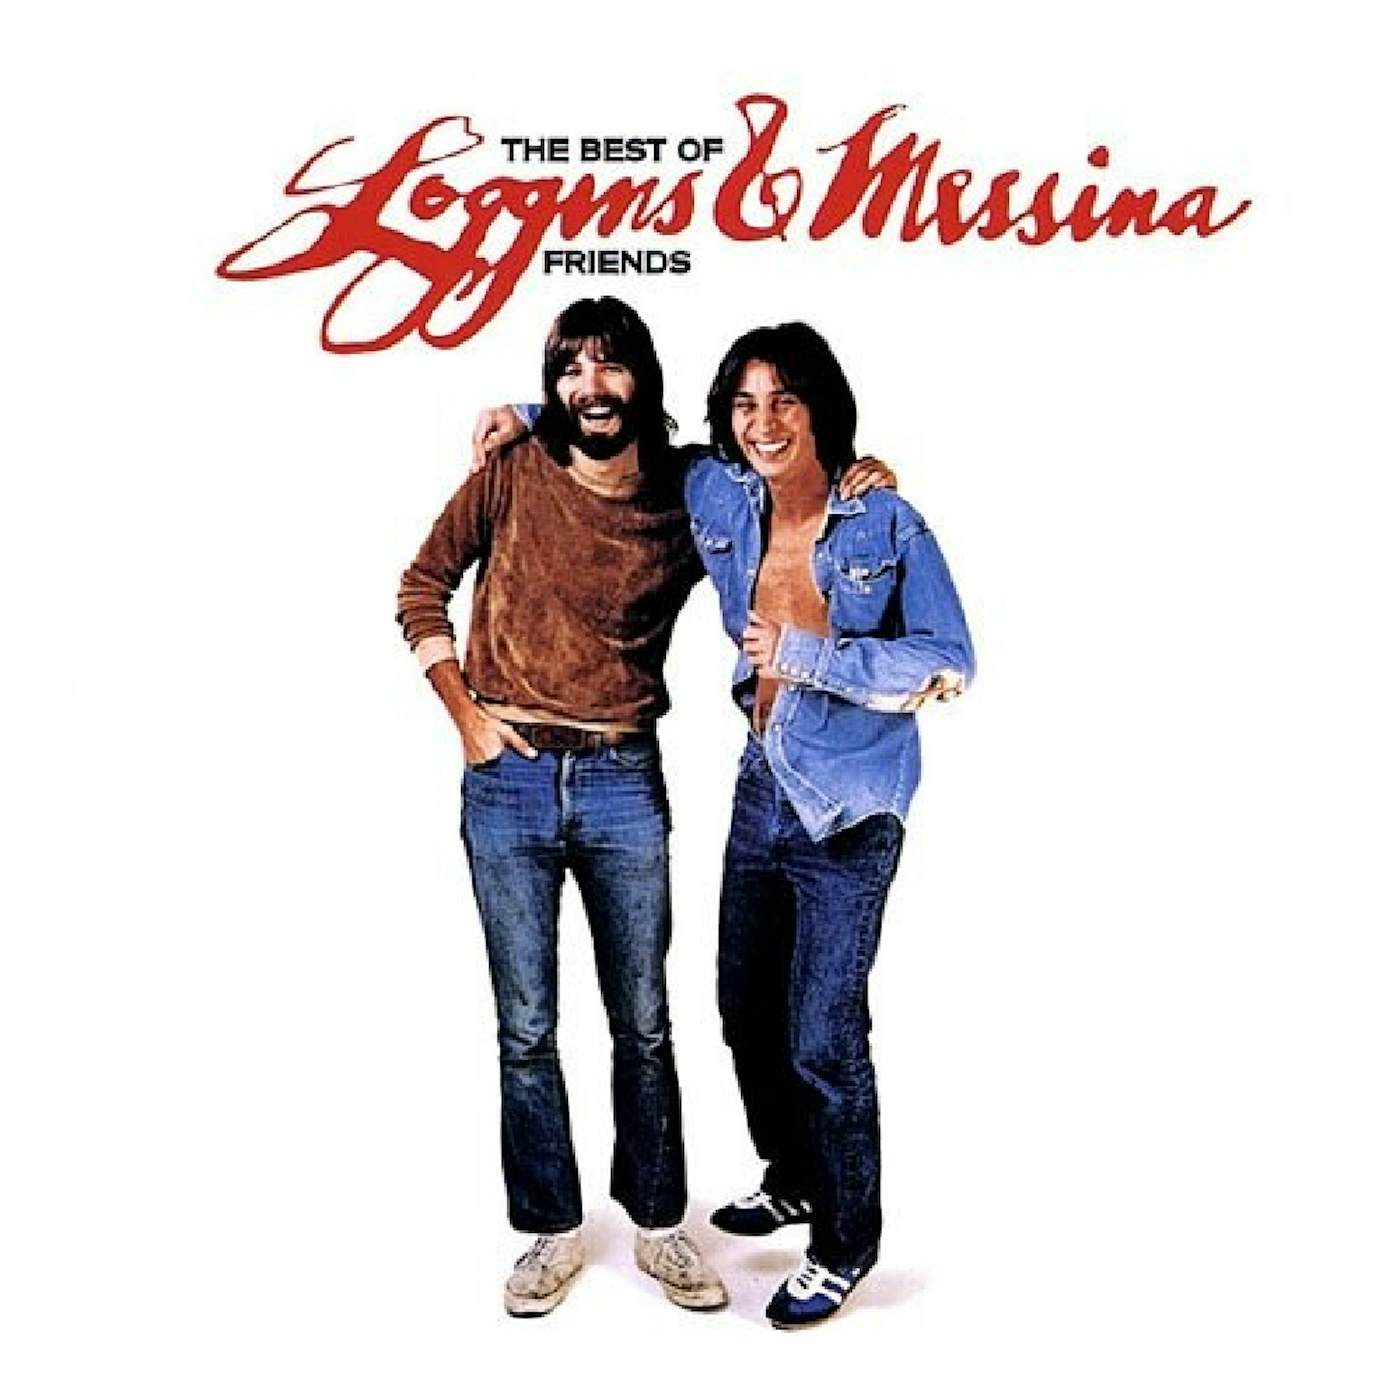 The Best of Friends: Loggins & Messina CD